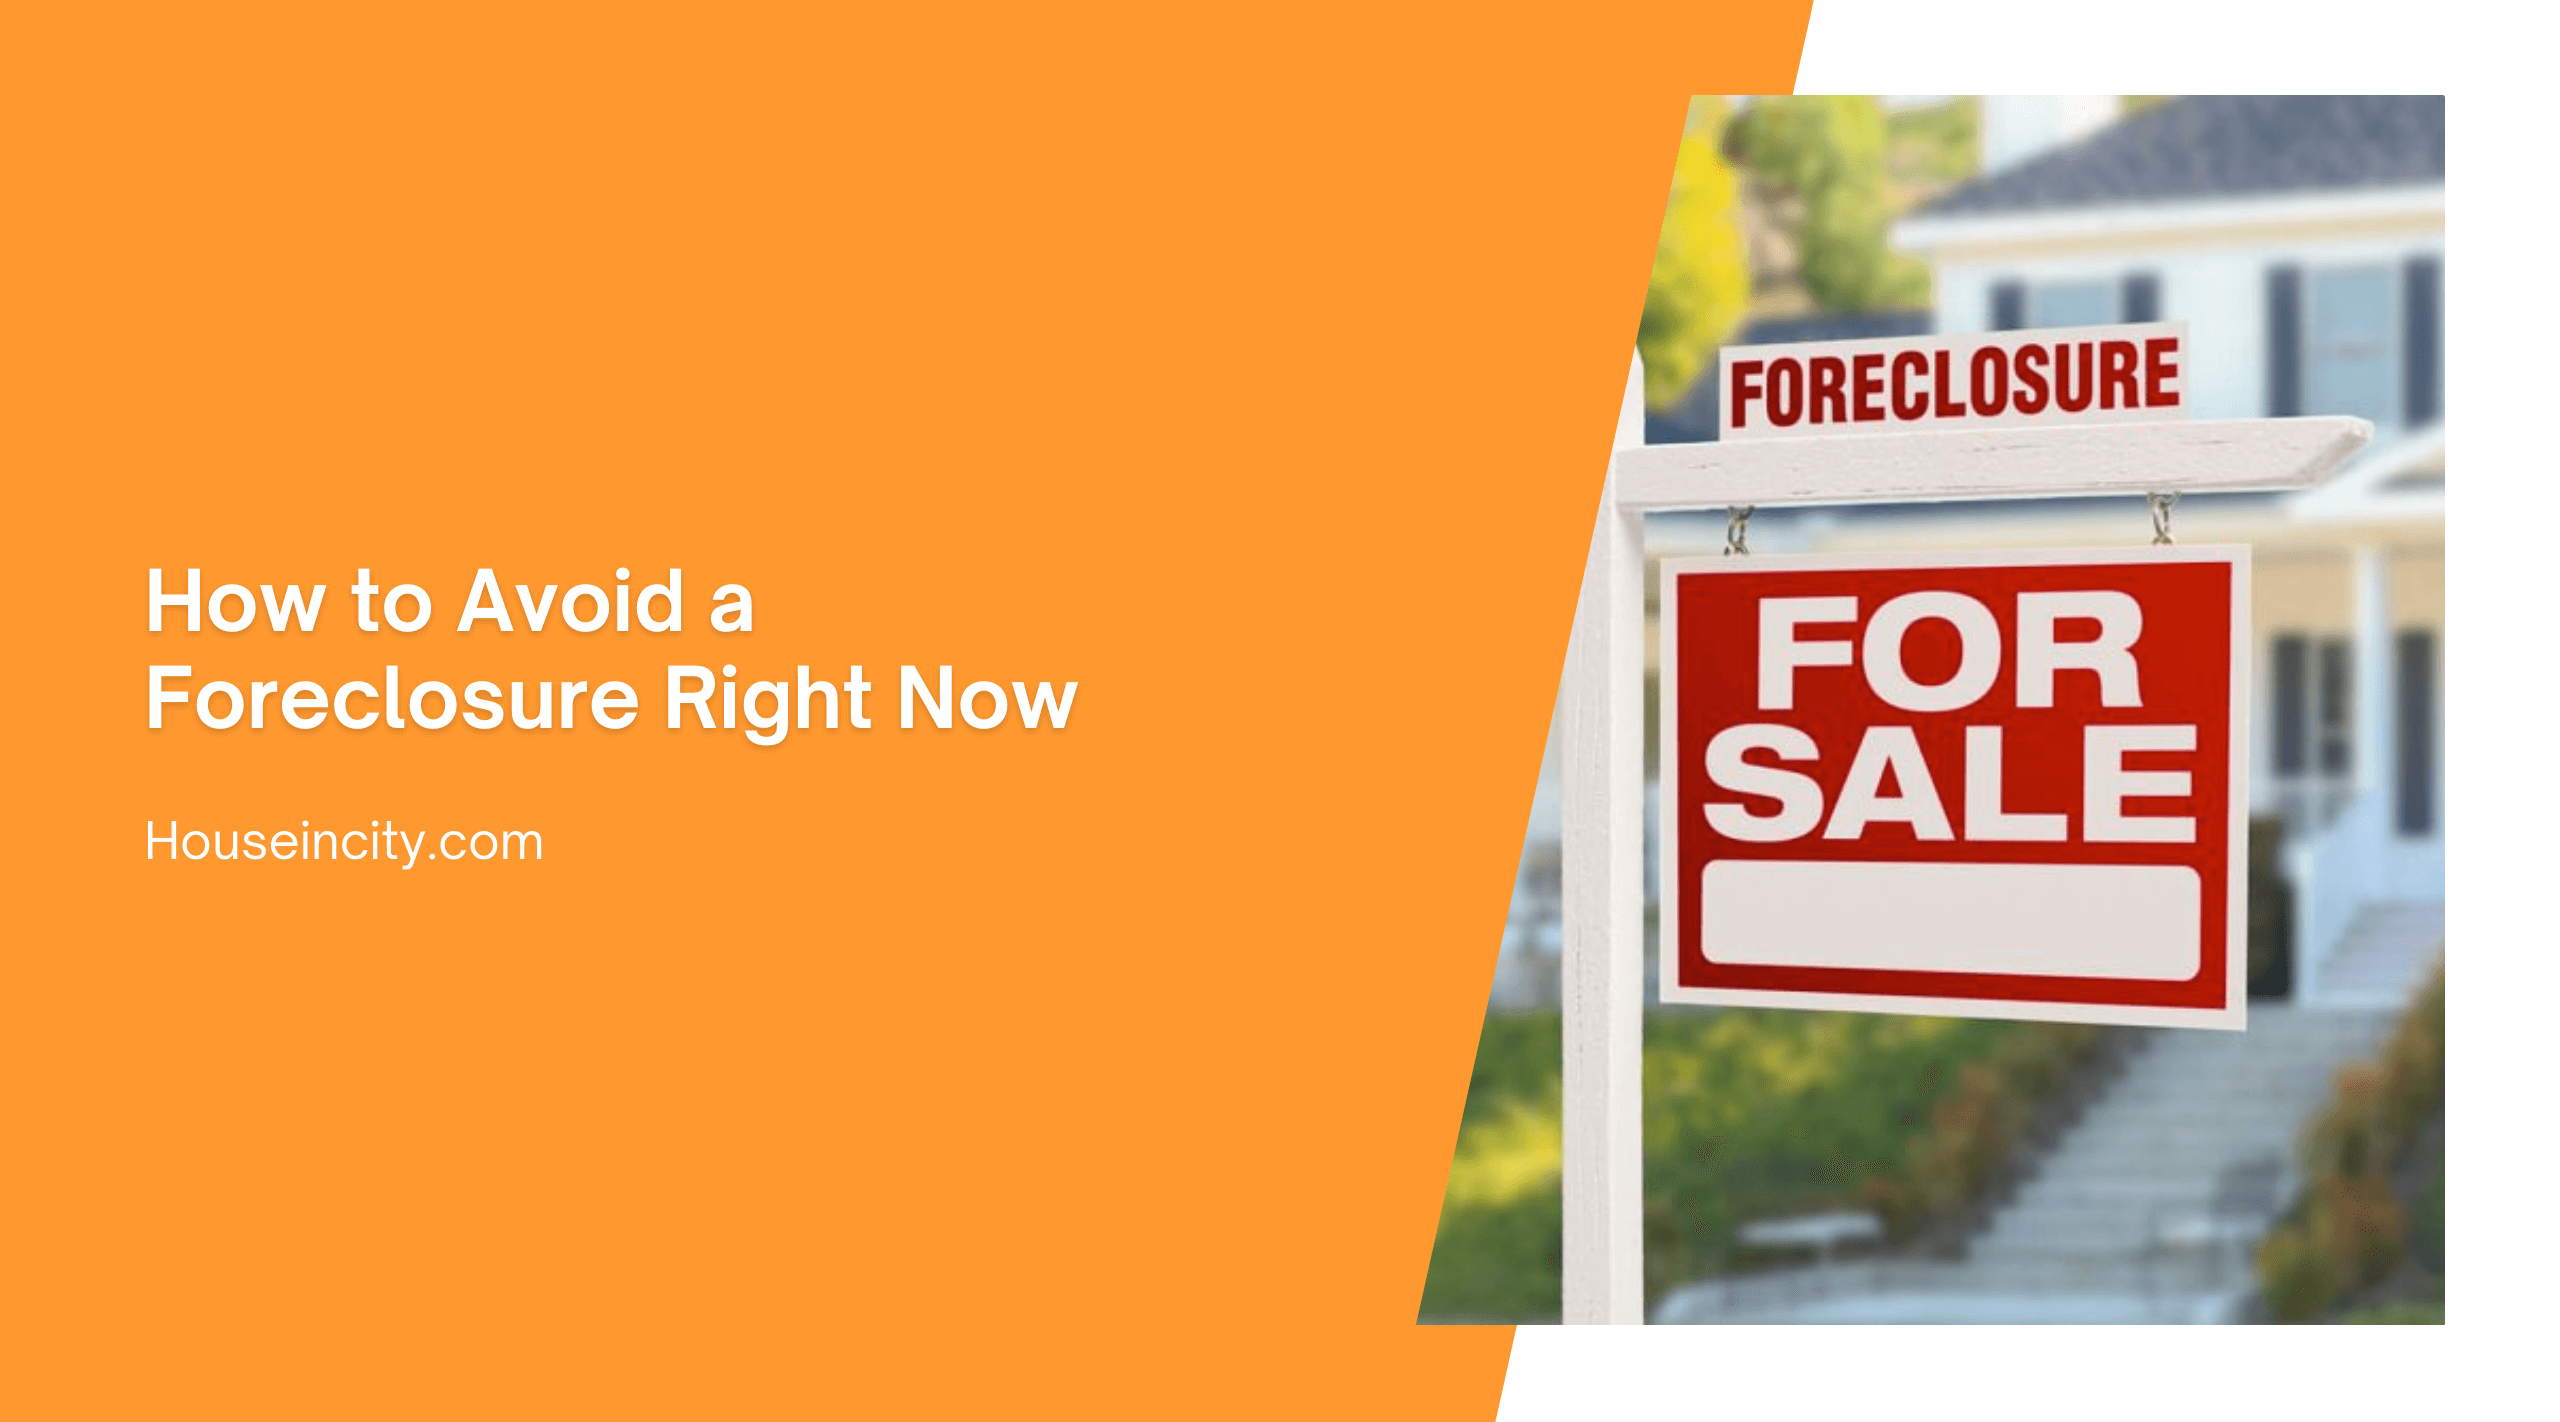 How to Avoid a Foreclosure Right Now